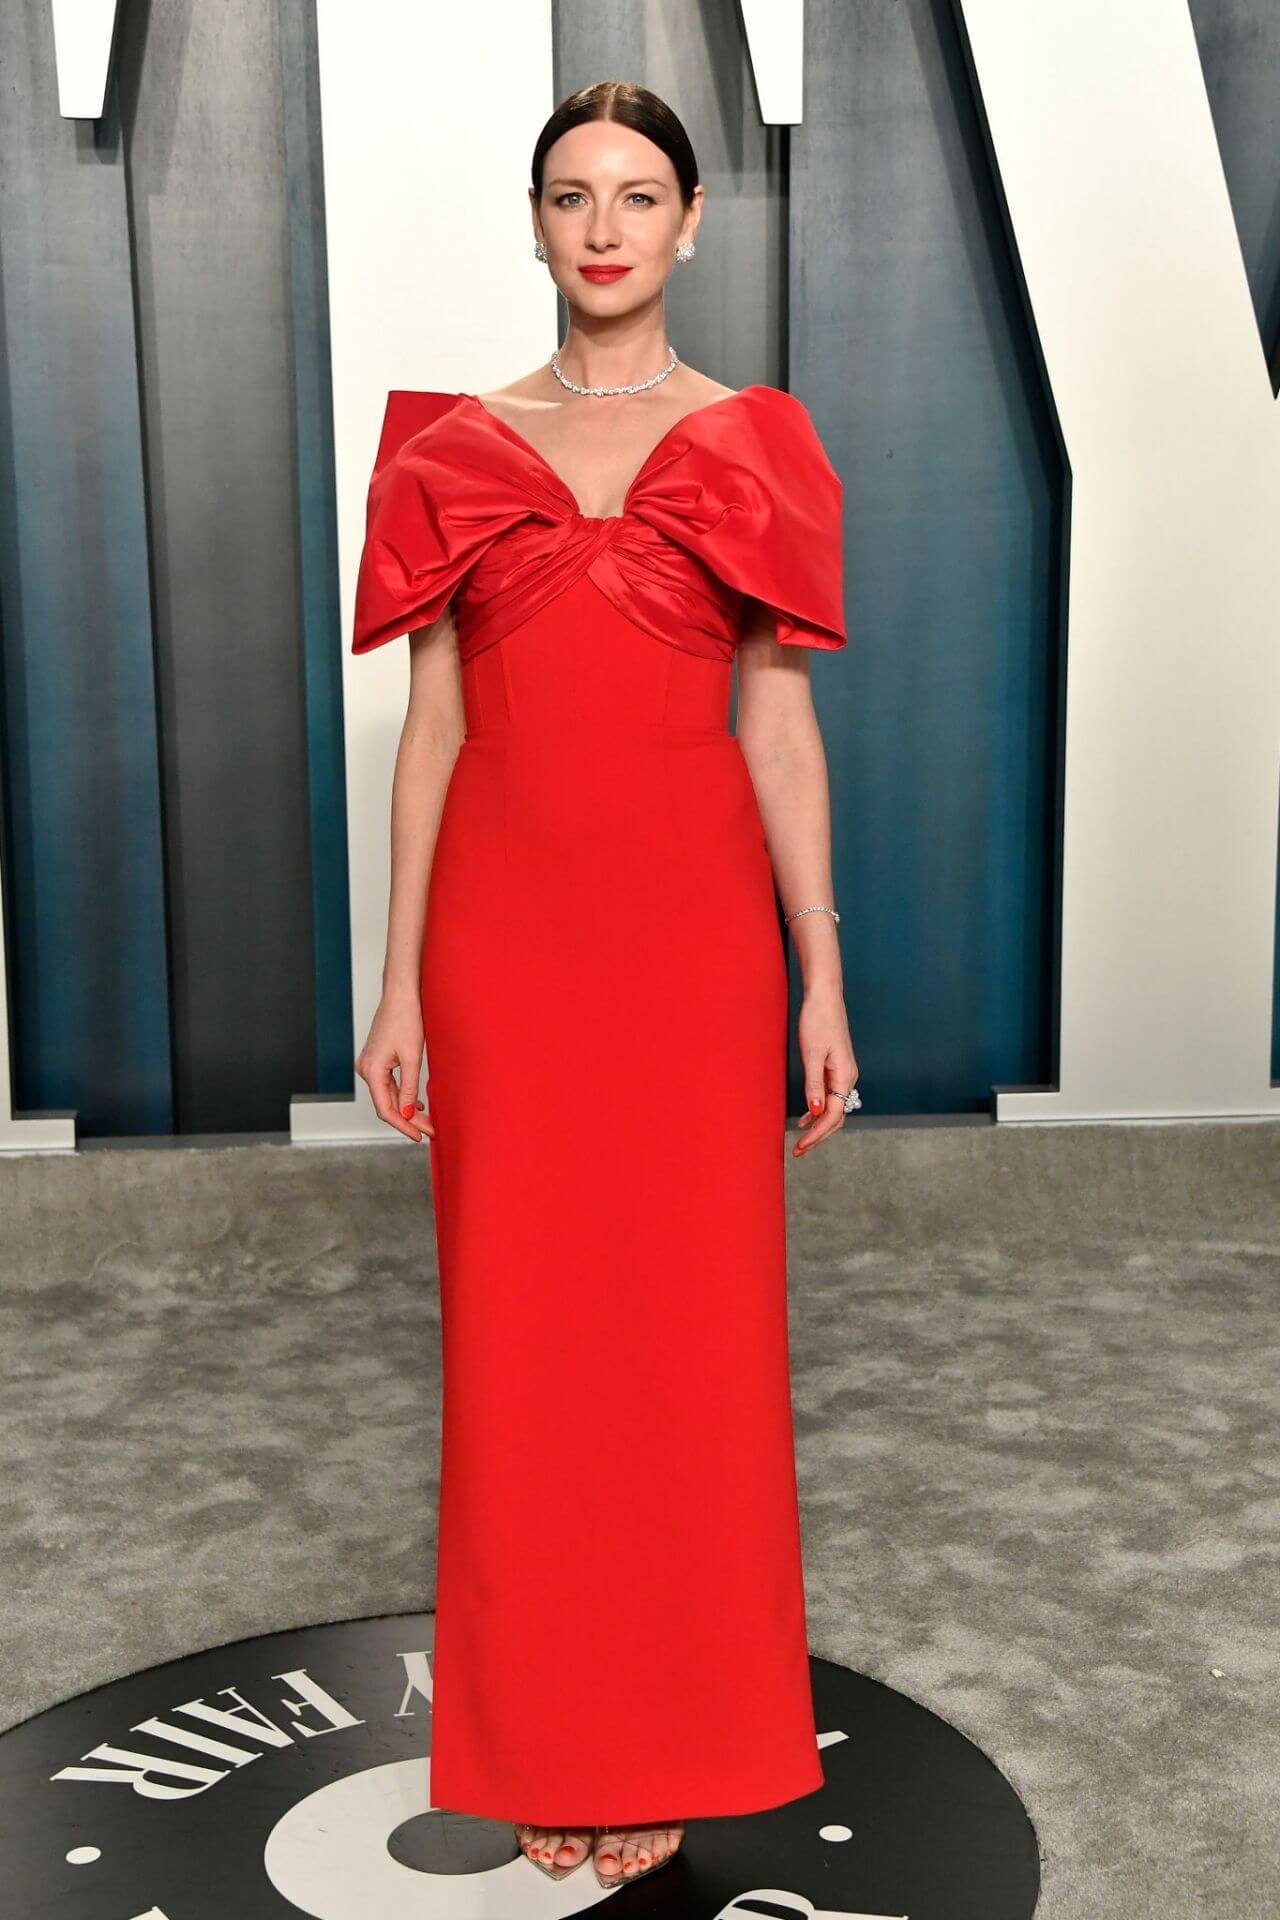 Caitriona Balfe Glossy Looks In Red With Bow Style Long Dress At Vanity Fair Oscar Party